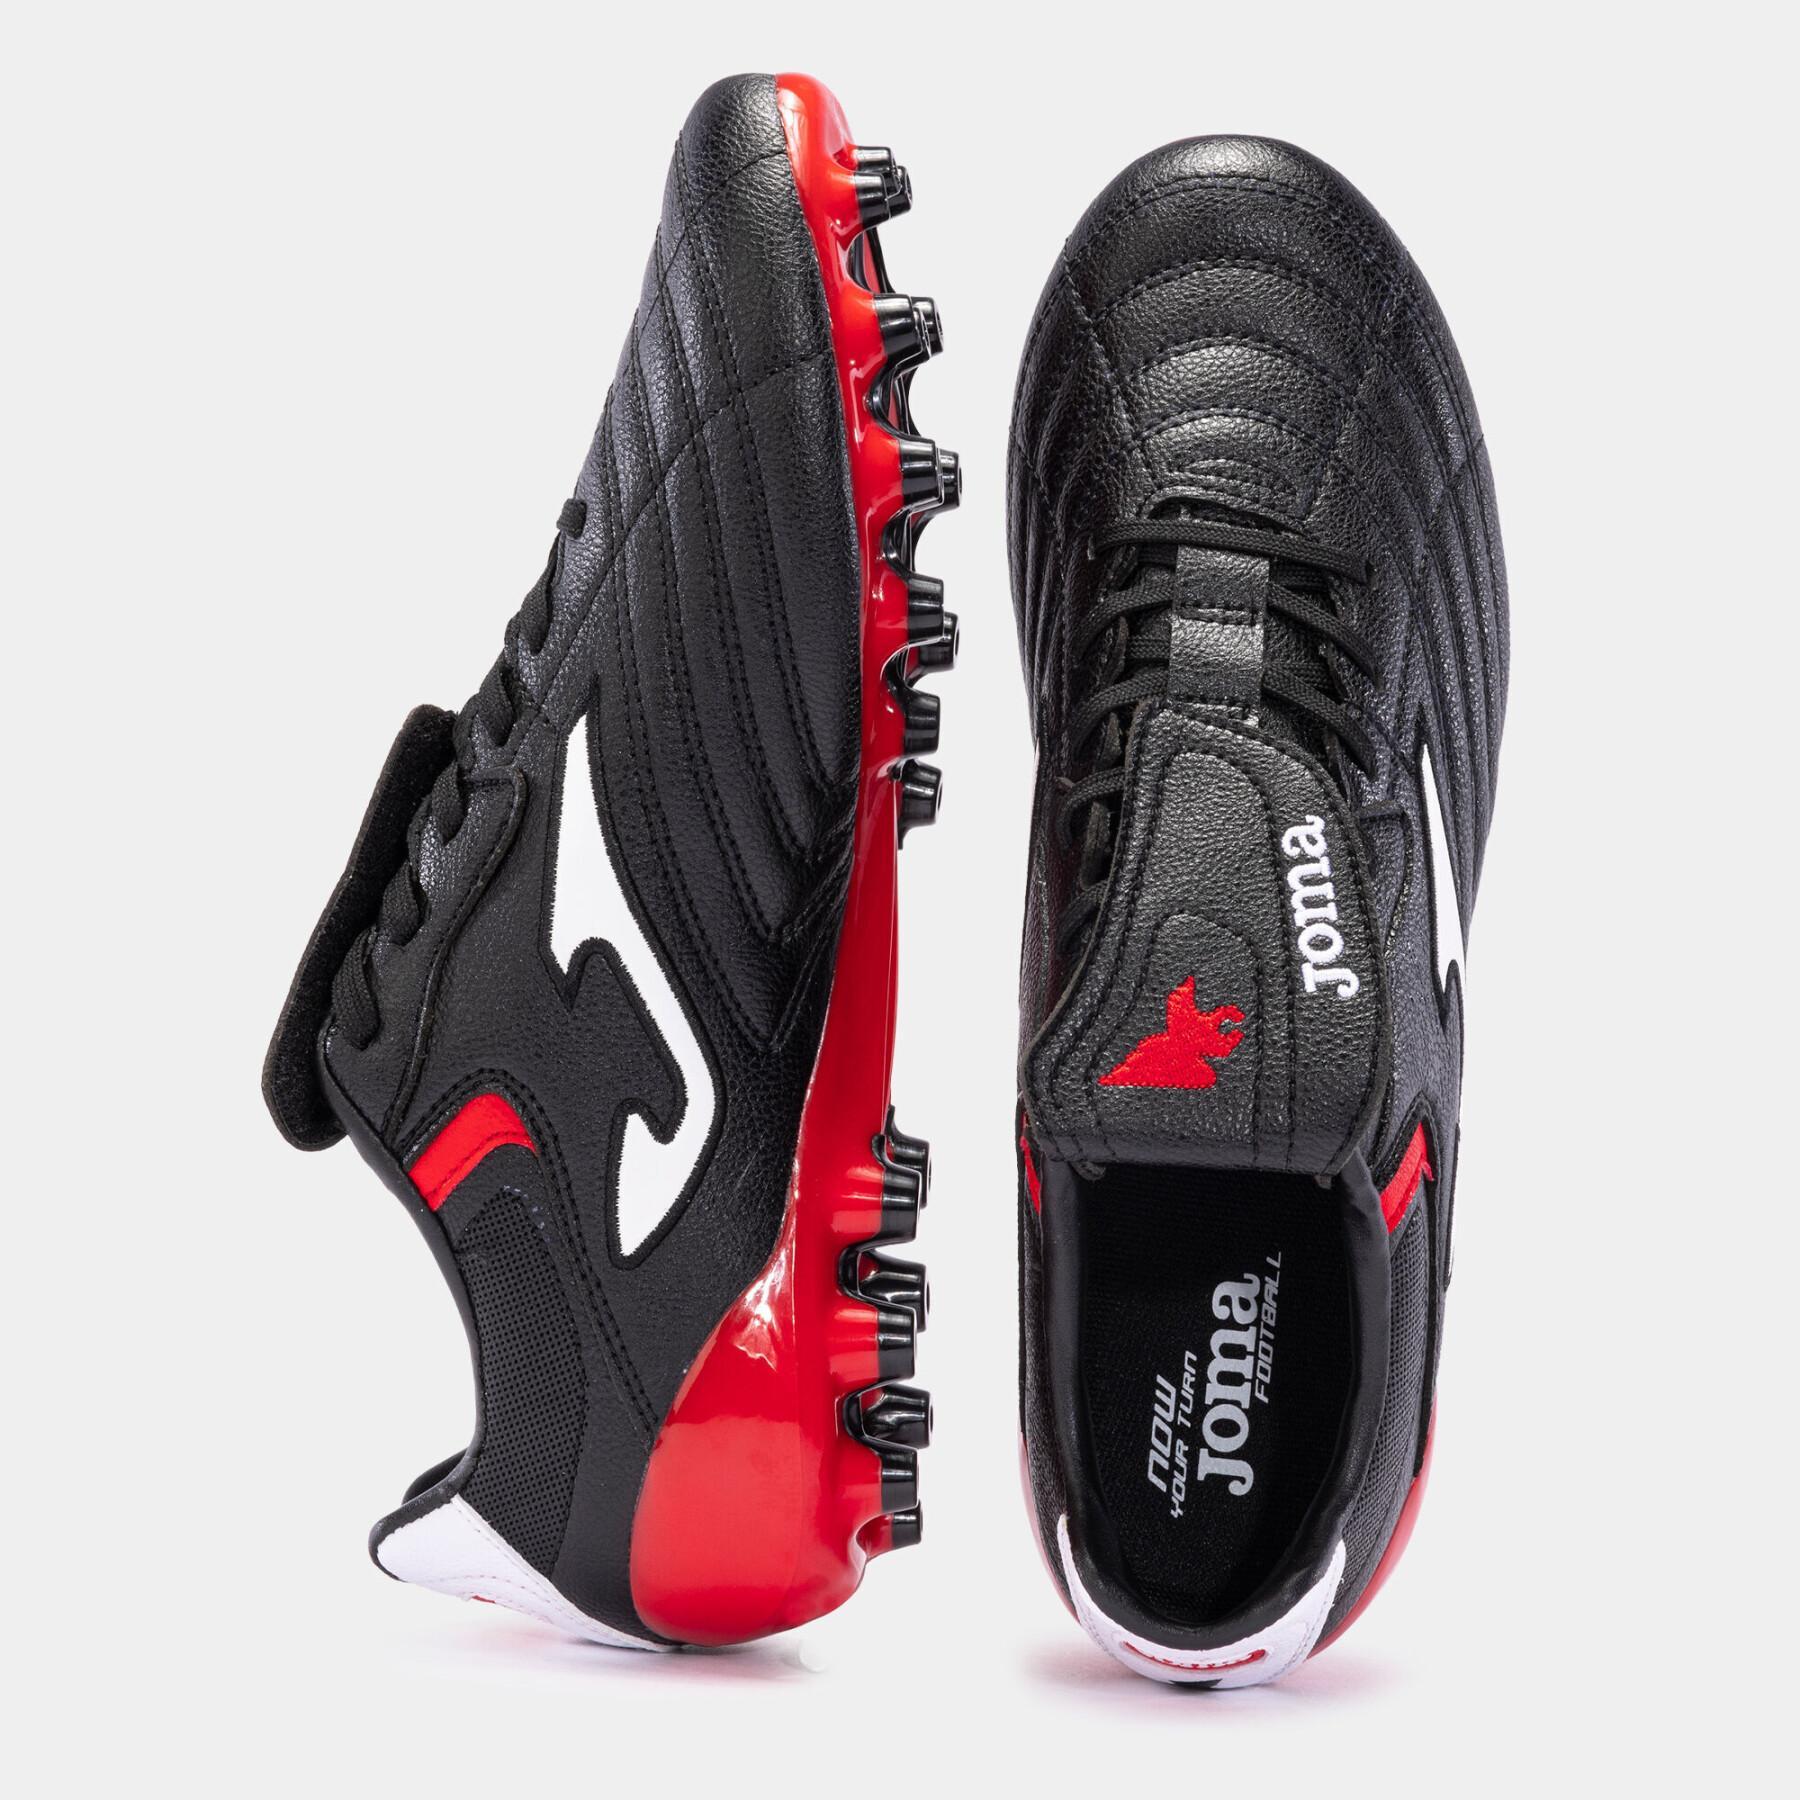 Voetbalschoenen Joma Aguila Cup 2301 AG